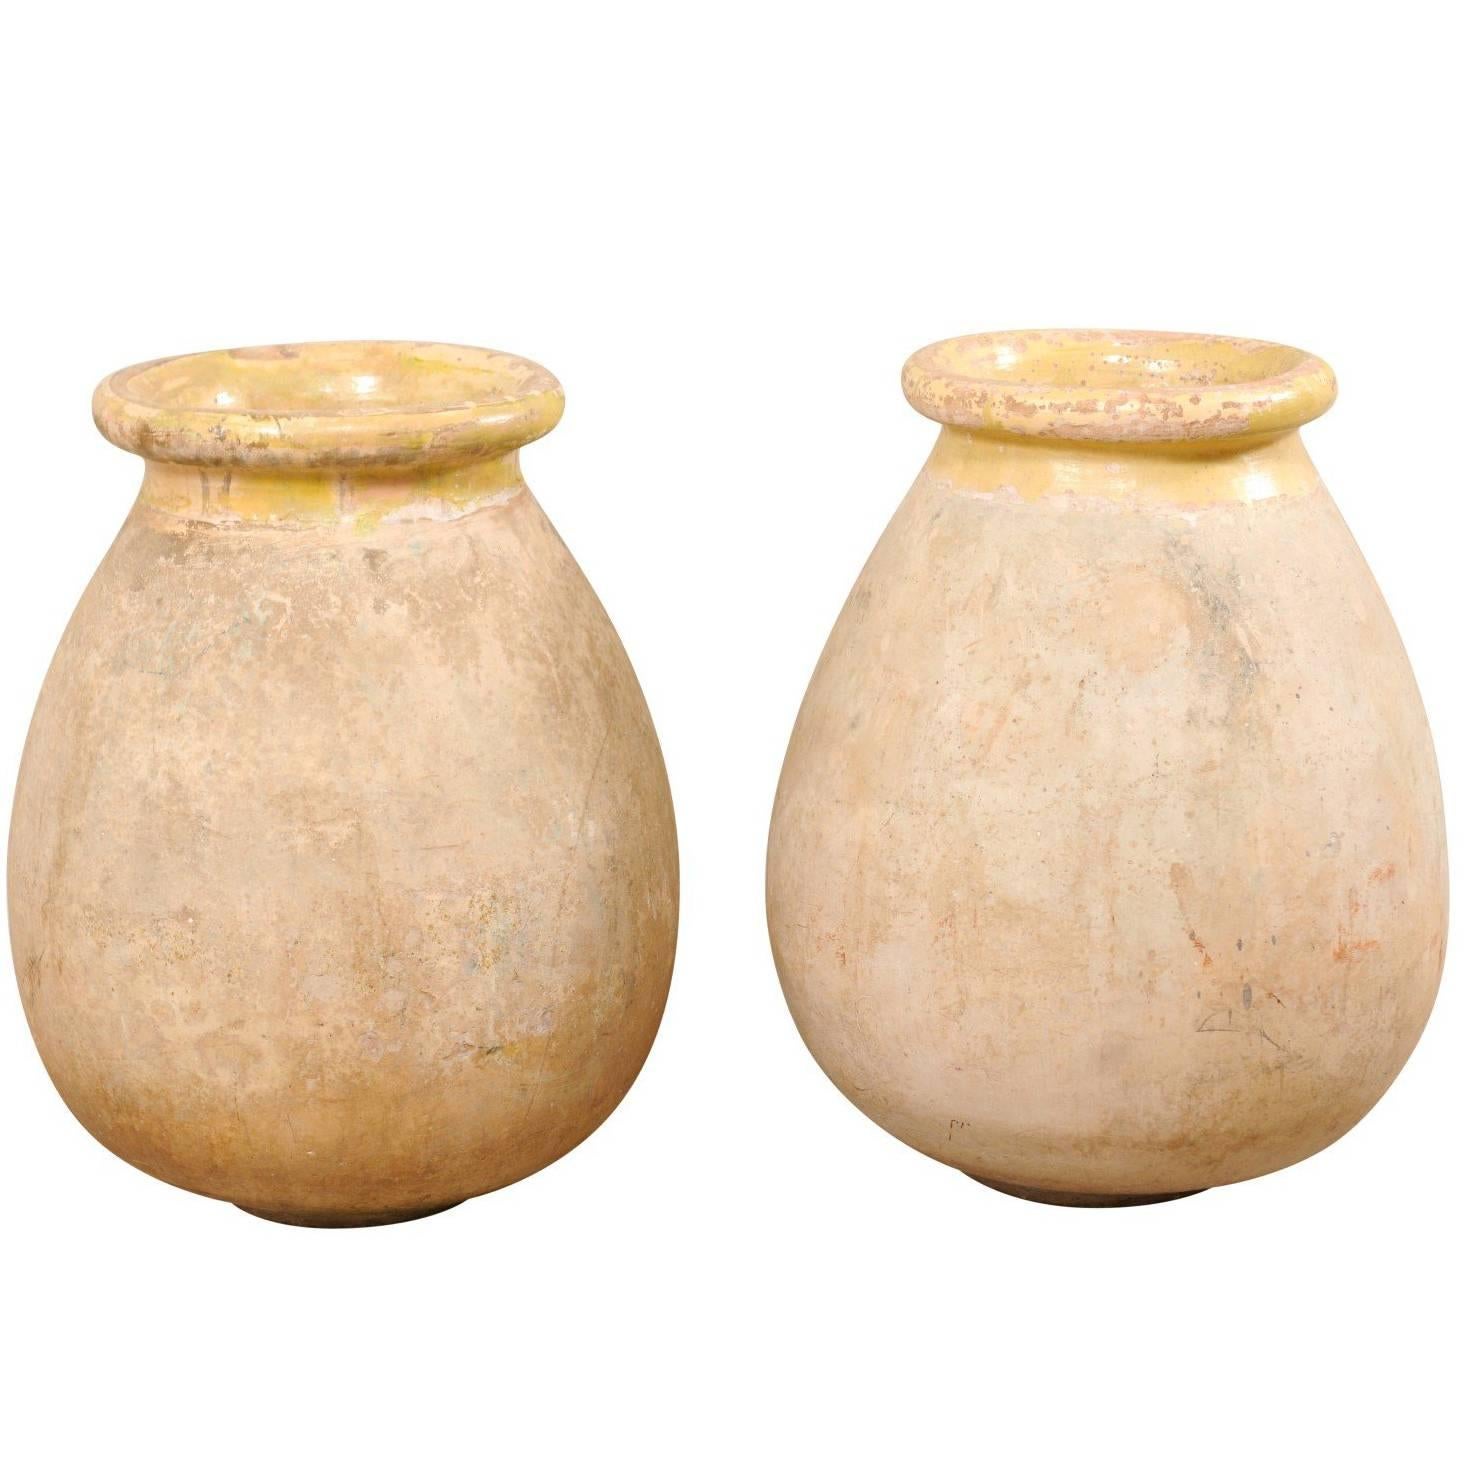 Pair of French 19th Century Biot Terracotta Pale Yellow Glazed Olive Jars